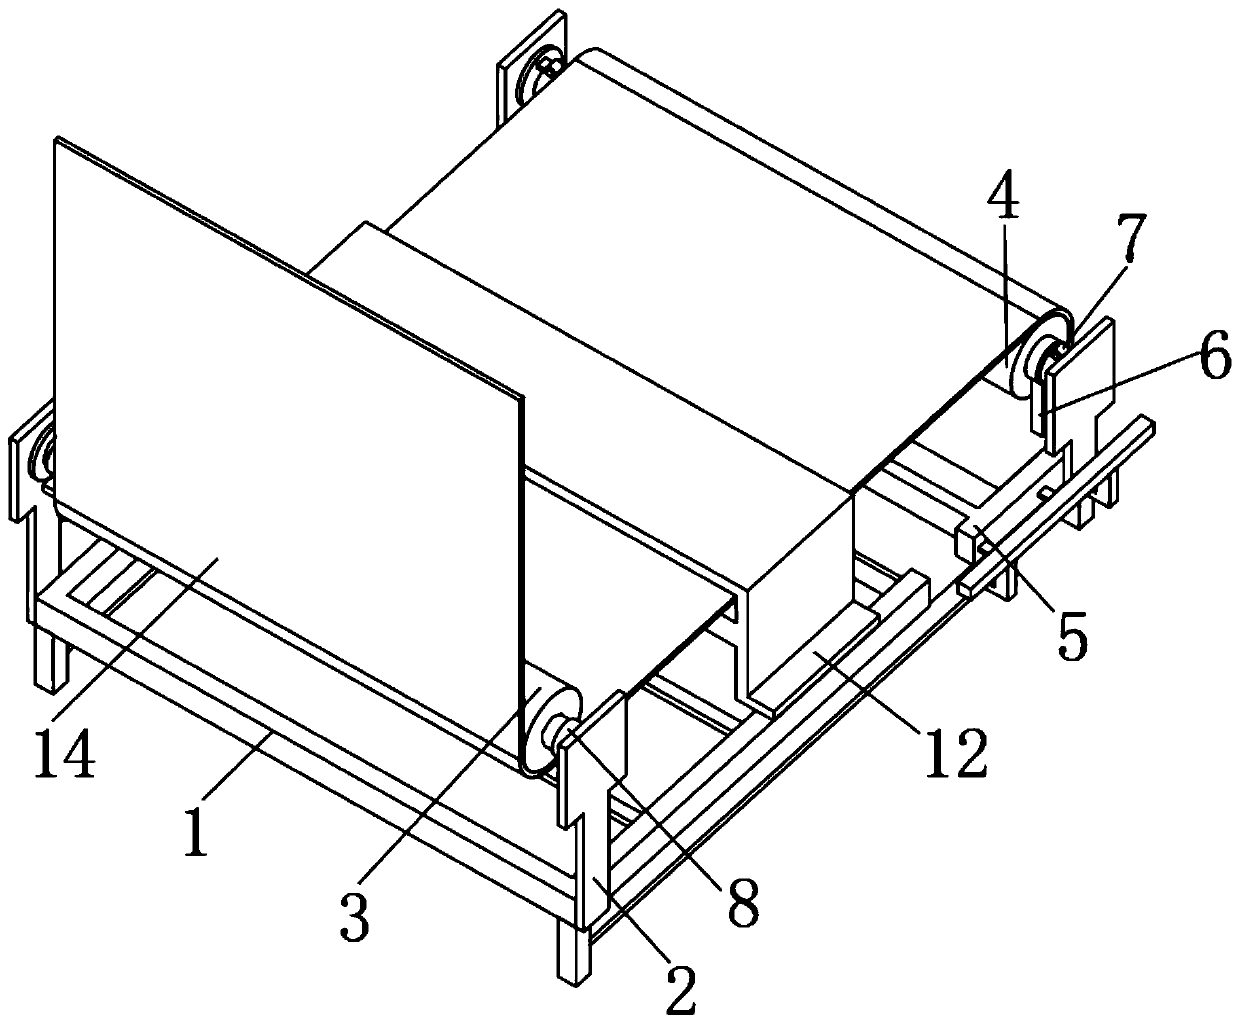 A production leveling device for anti-warping of light guide film